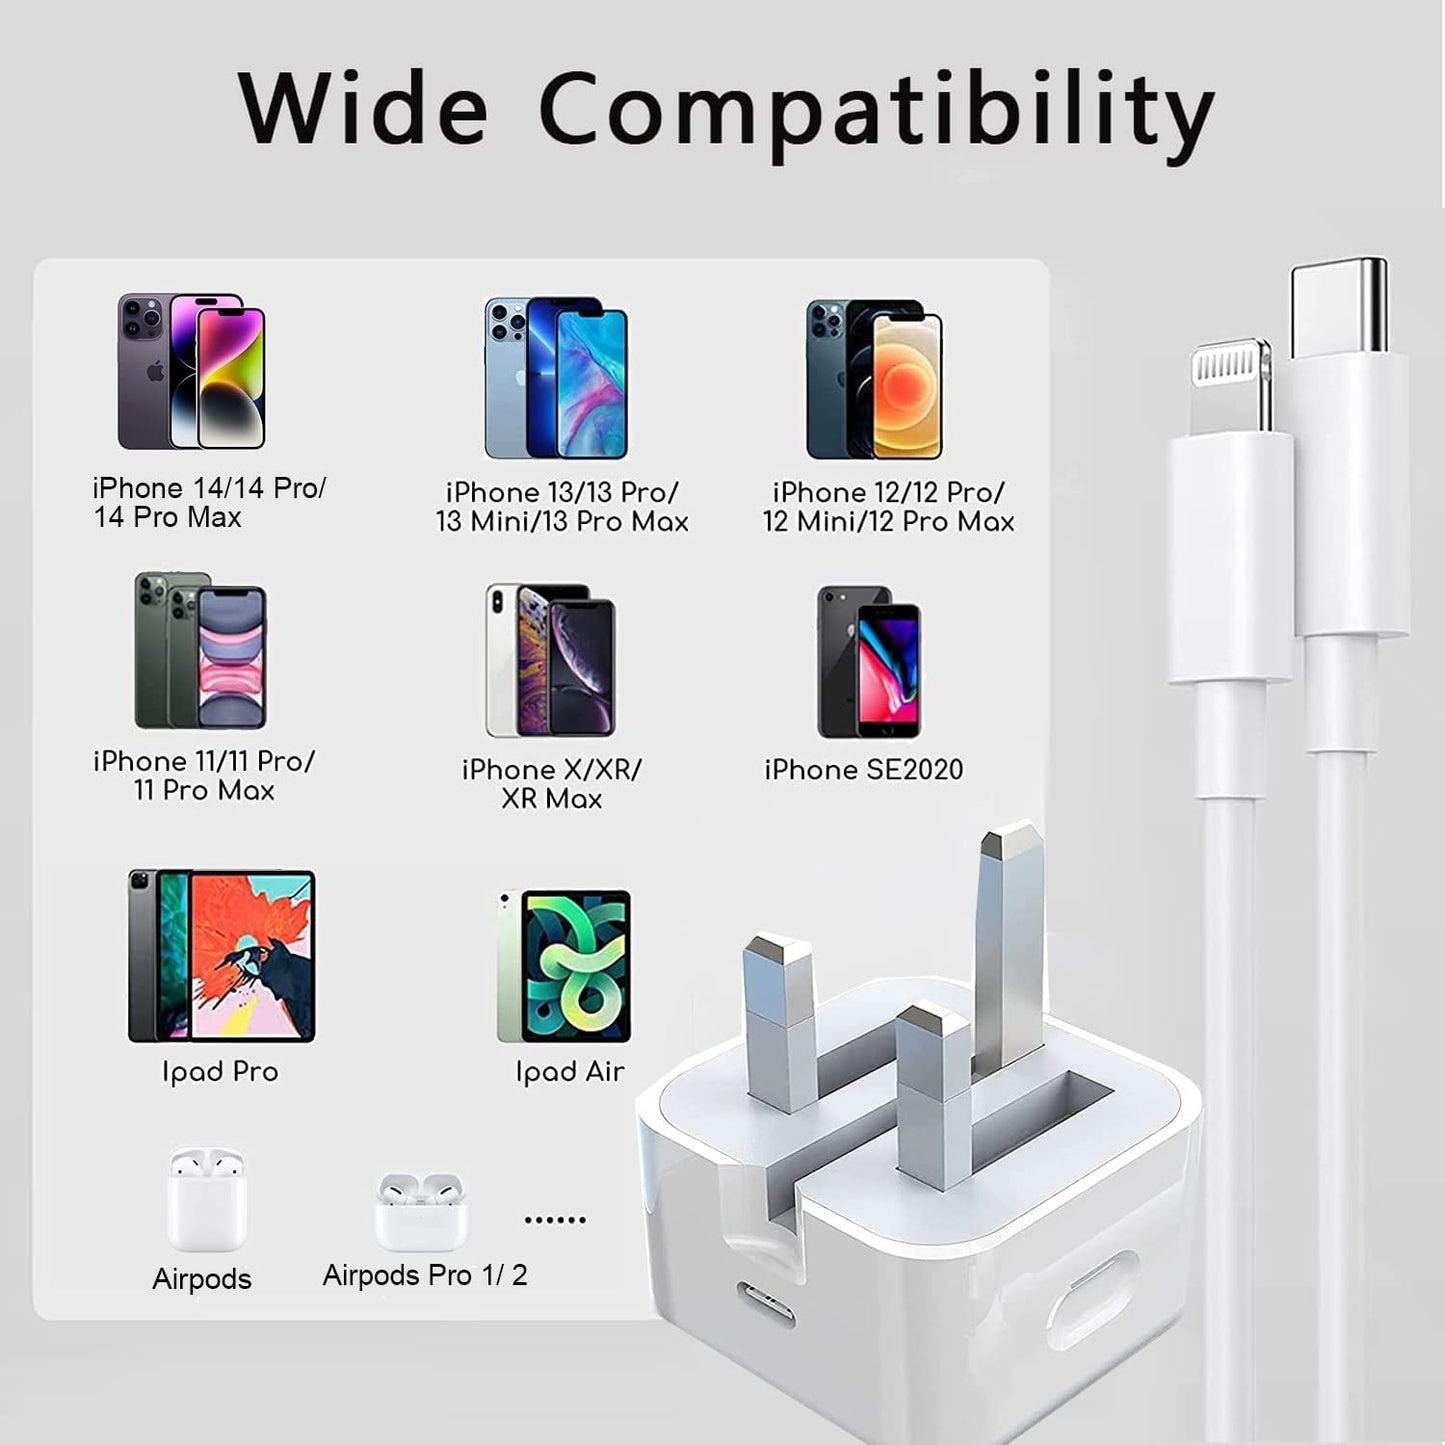 Case Logic [Apple MFi Certified] iPhone 20W PD Fast Charger, Type C Power Block Wall Charger Plug Adapter 1-M USB-C to Lightning Cable 14 13 12 11 Pro Mini XS XR X, iPad, AirPod, white, Q1 (VR-001Z)